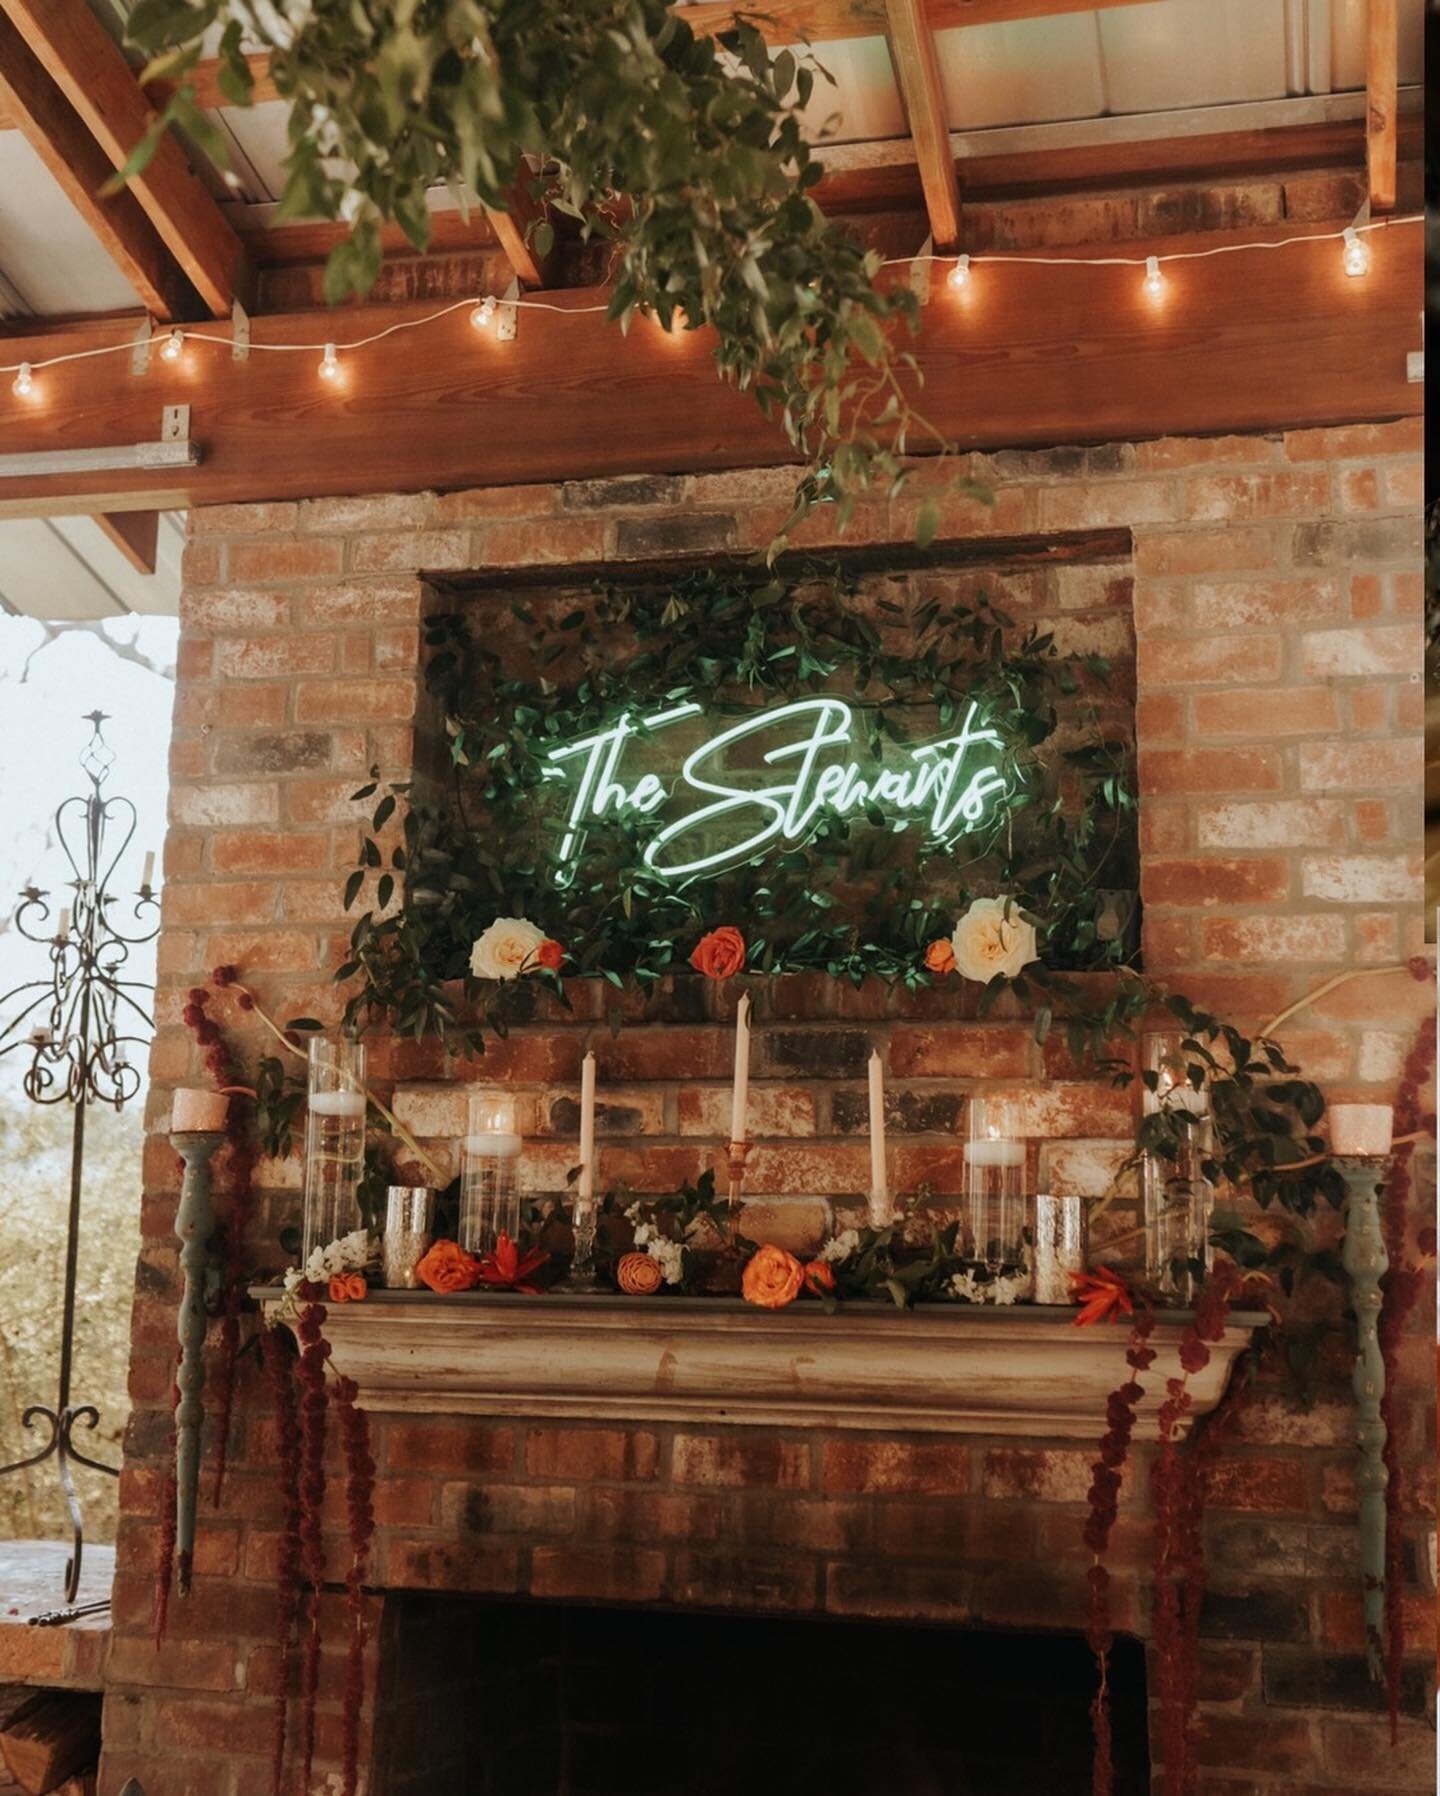 Always a sucker for neon signs but the decor for this reception was so whimsy! Heather and Ben knew exactly how to swoon us.